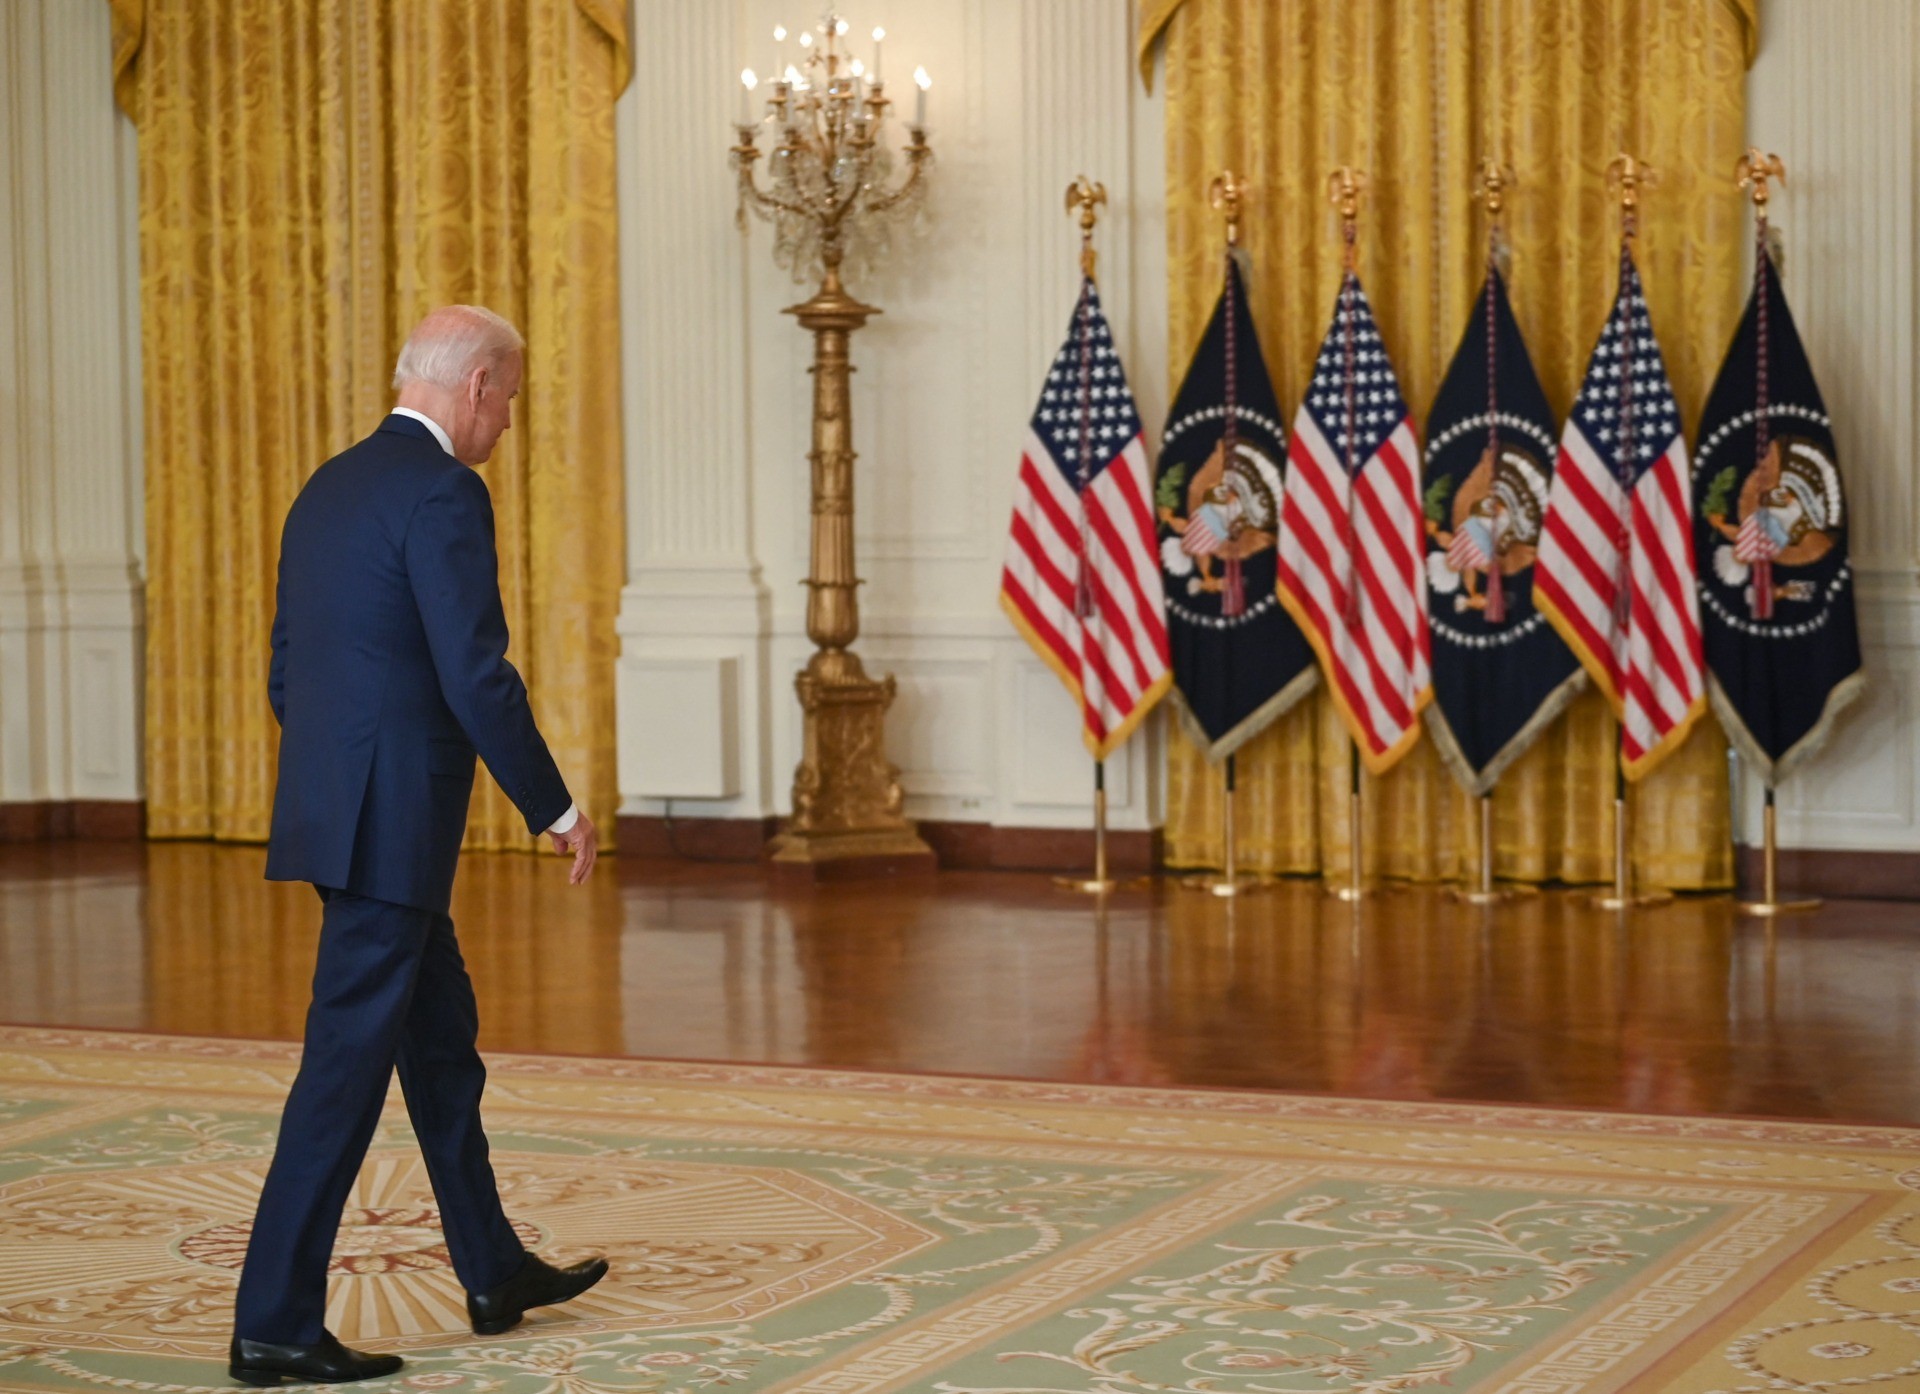 US President Joe Biden leaves after speaking about the economy and the middle class, in the East Room of the White House in Washington, DC, on September 16, 2021. (Photo by Brendan SMIALOWSKI / AFP) (Photo by BRENDAN SMIALOWSKI/AFP via Getty Images)